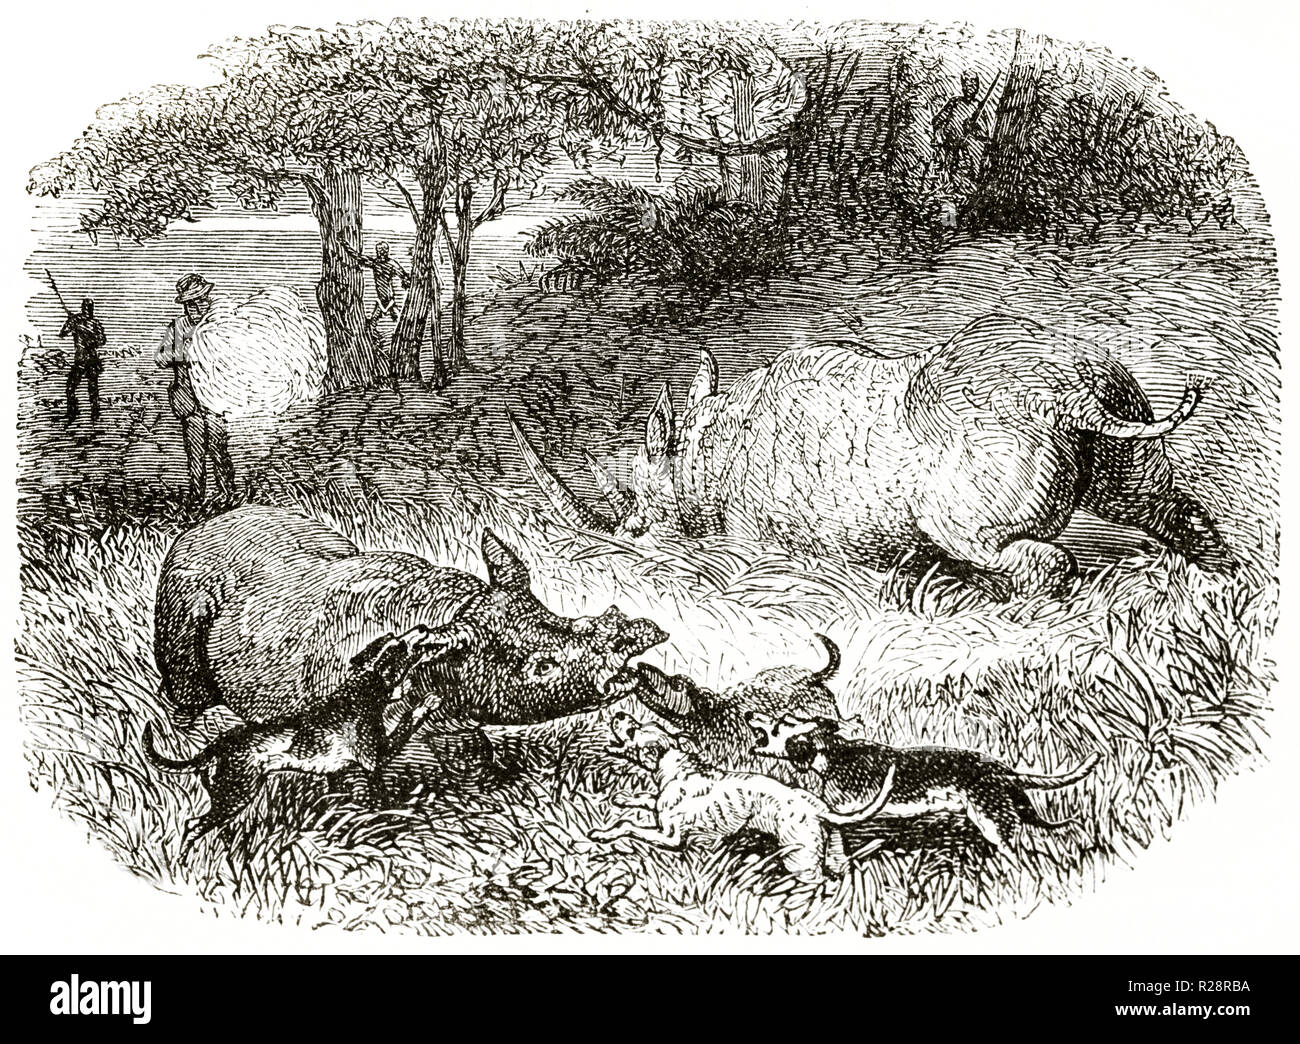 Old illustration of hunter shooting Rhino while dogs attacks young. By unidentified author, publ. on le Tour du Monde, Paris, 1863 Stock Photo